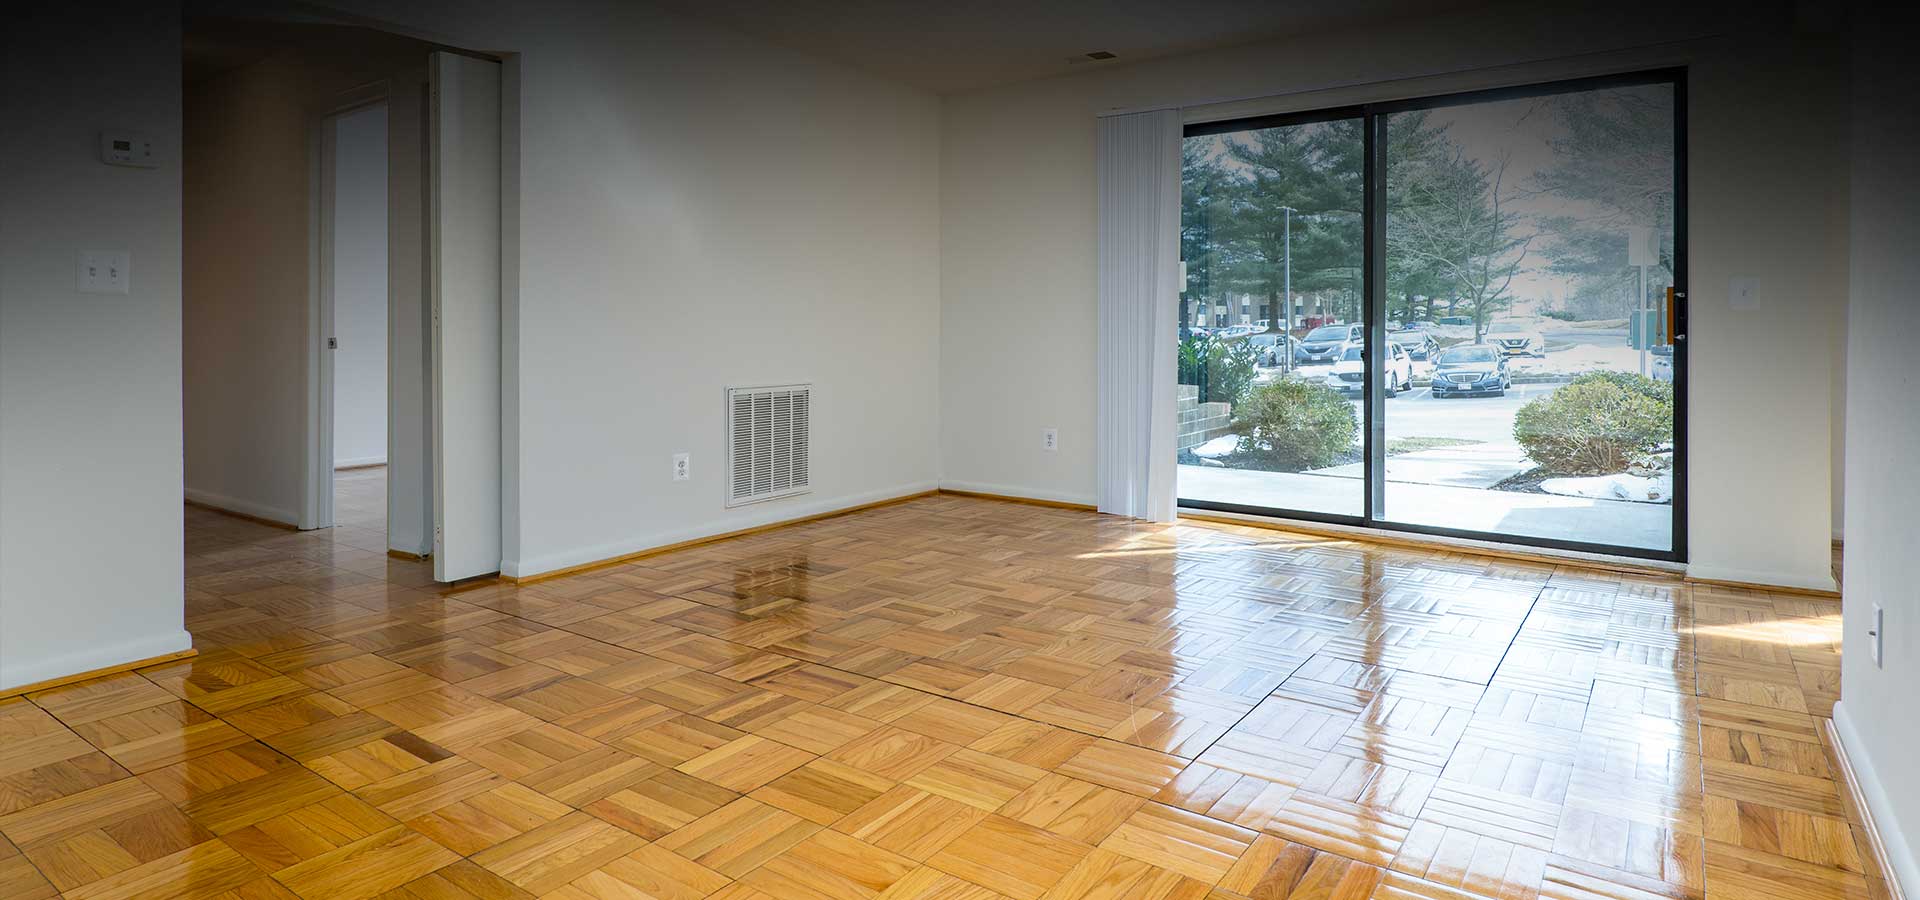 Apartment living room with hardwood floor